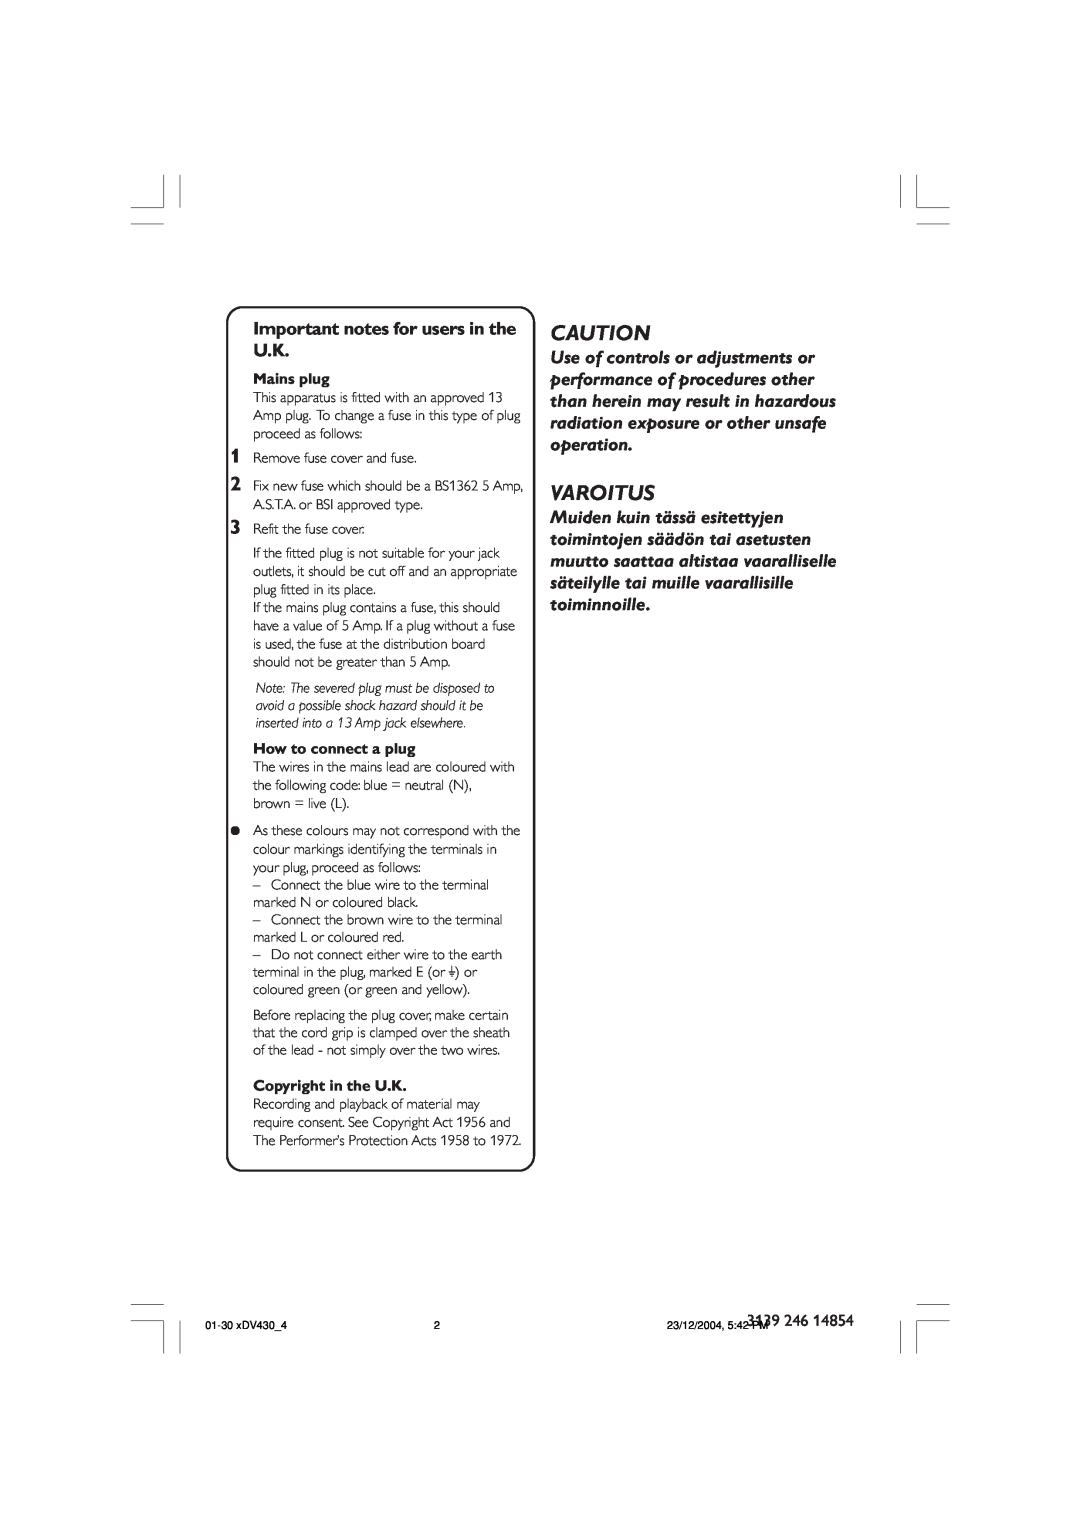 Philips MMS430 user manual Important notes for users in the U.K, Varoitus 